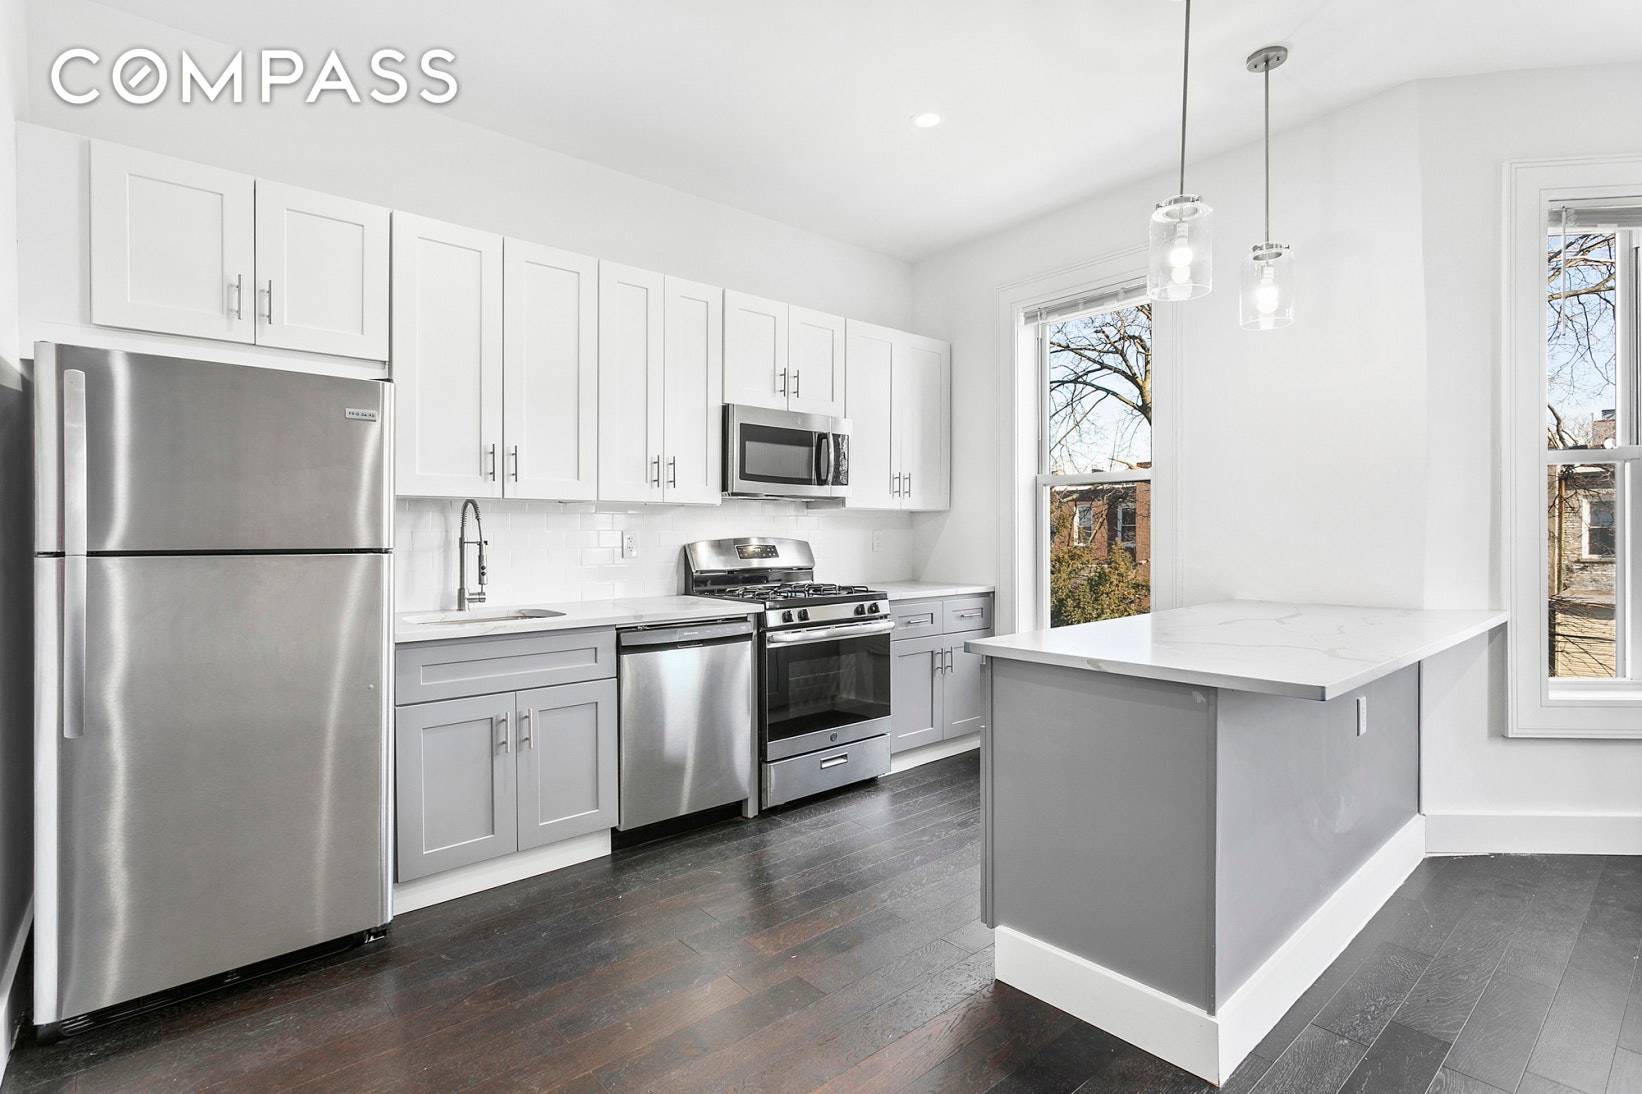 This newly renovated, beautiful 2 bedroom apartment has a spacious open layout with high ceilings, exposed brick, brand new stainless steel appliances and high end finishes.